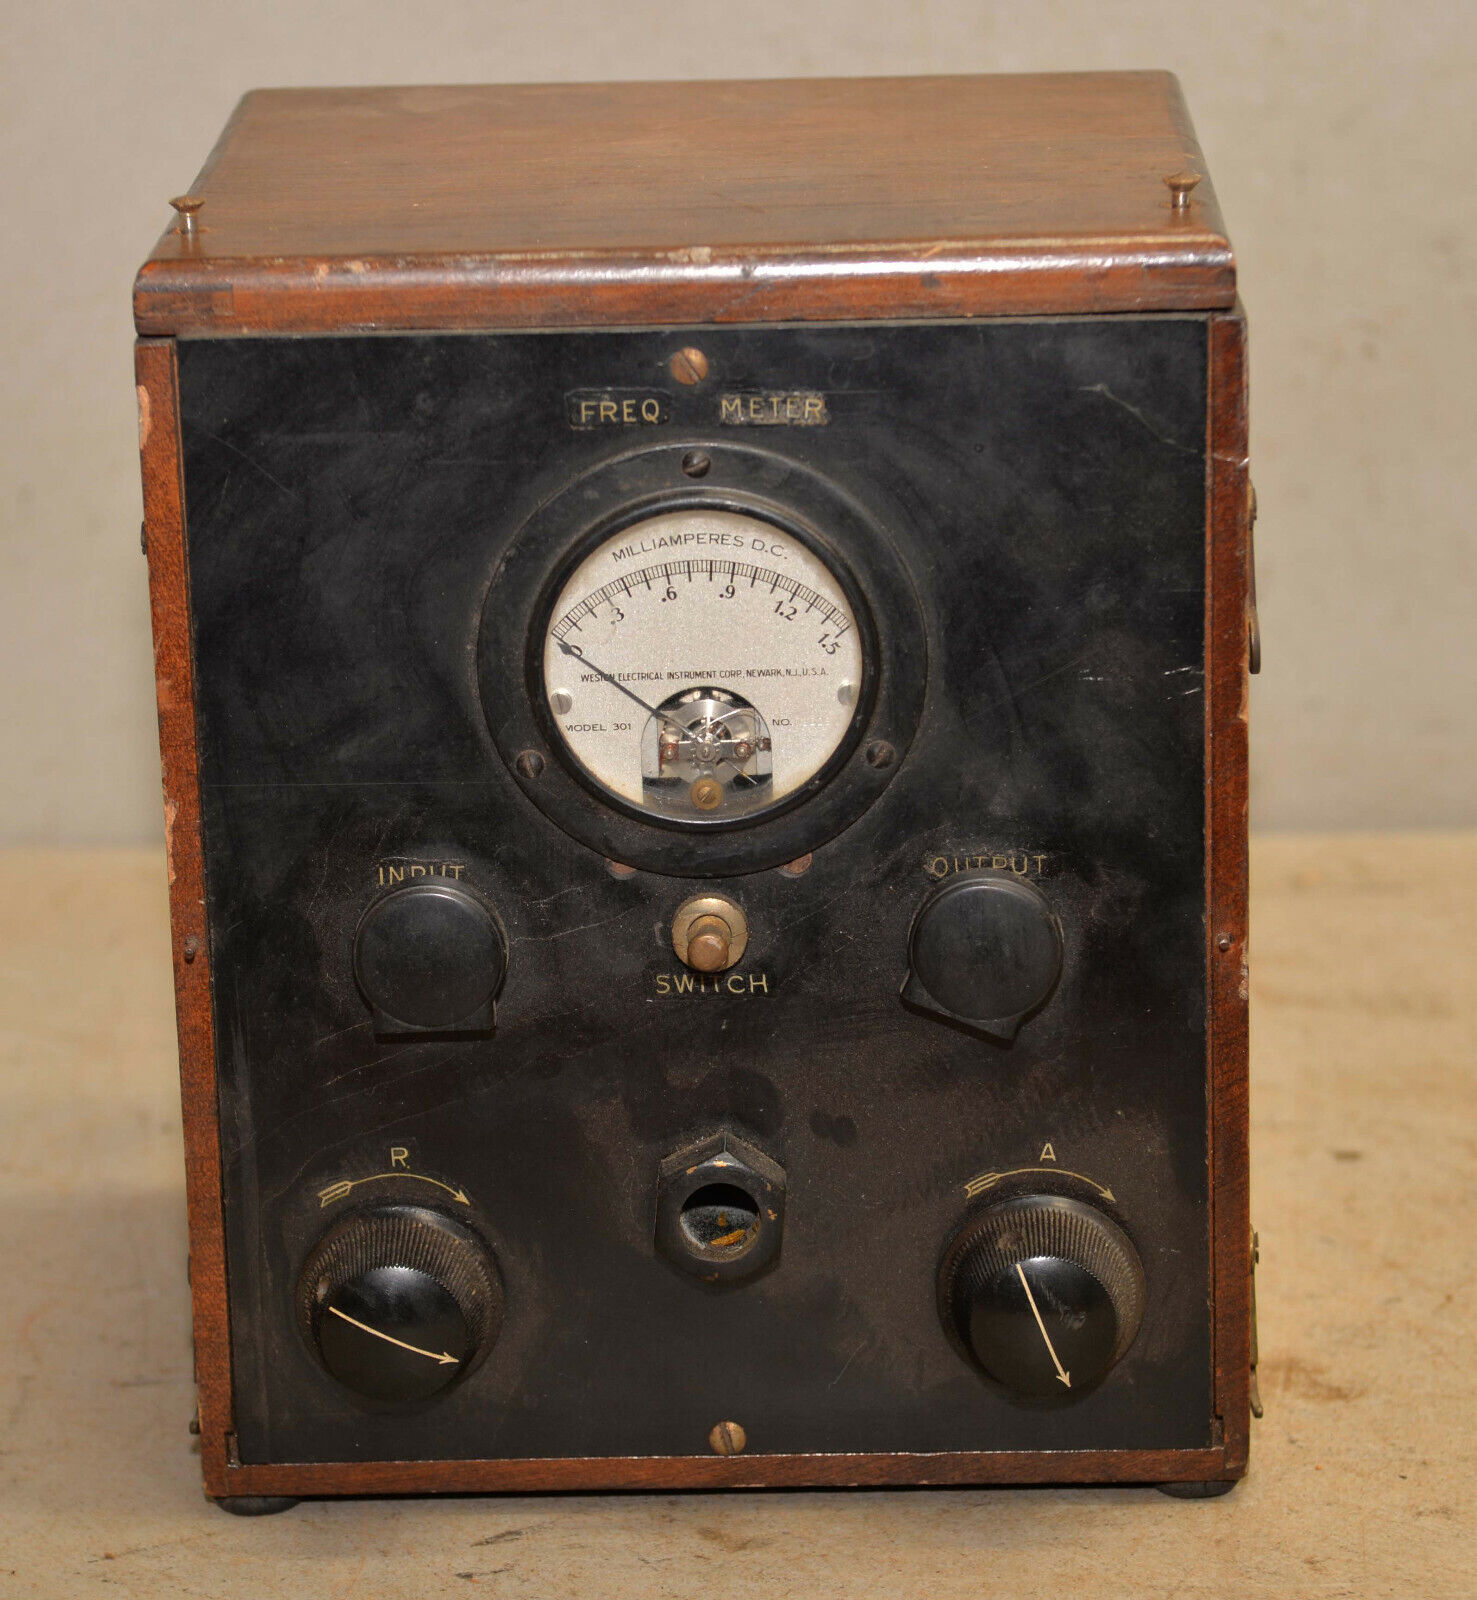 Antique frequency meter SX120 tube wood case collectible audio tool